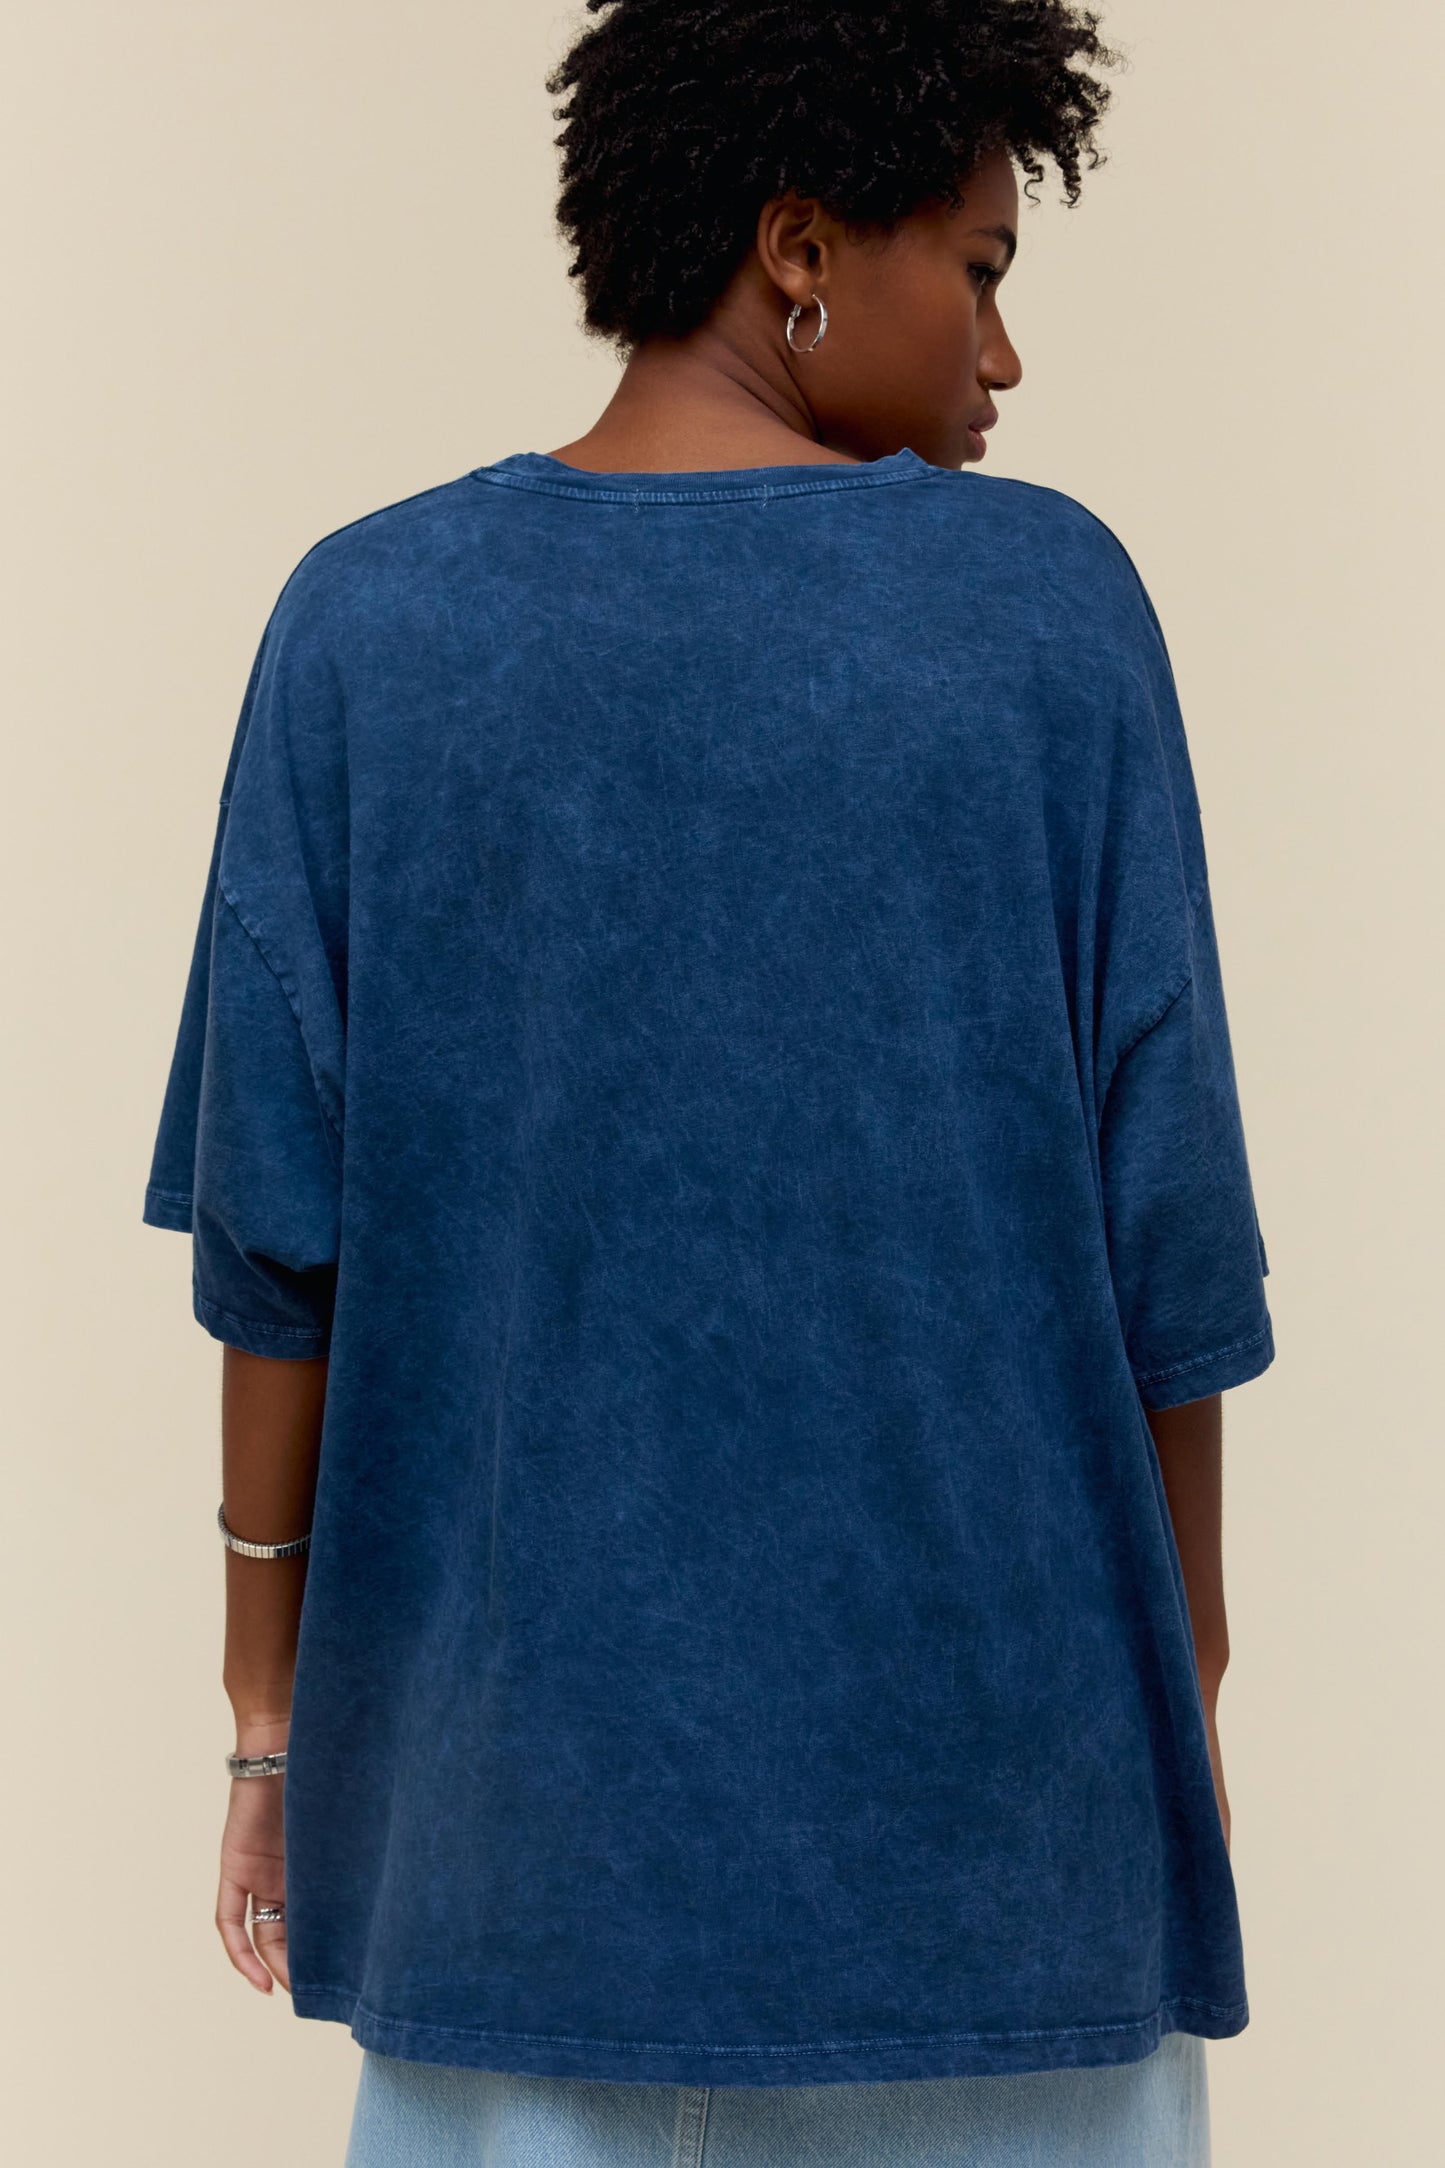 Solid OS Tee in Navy Mineral Wash